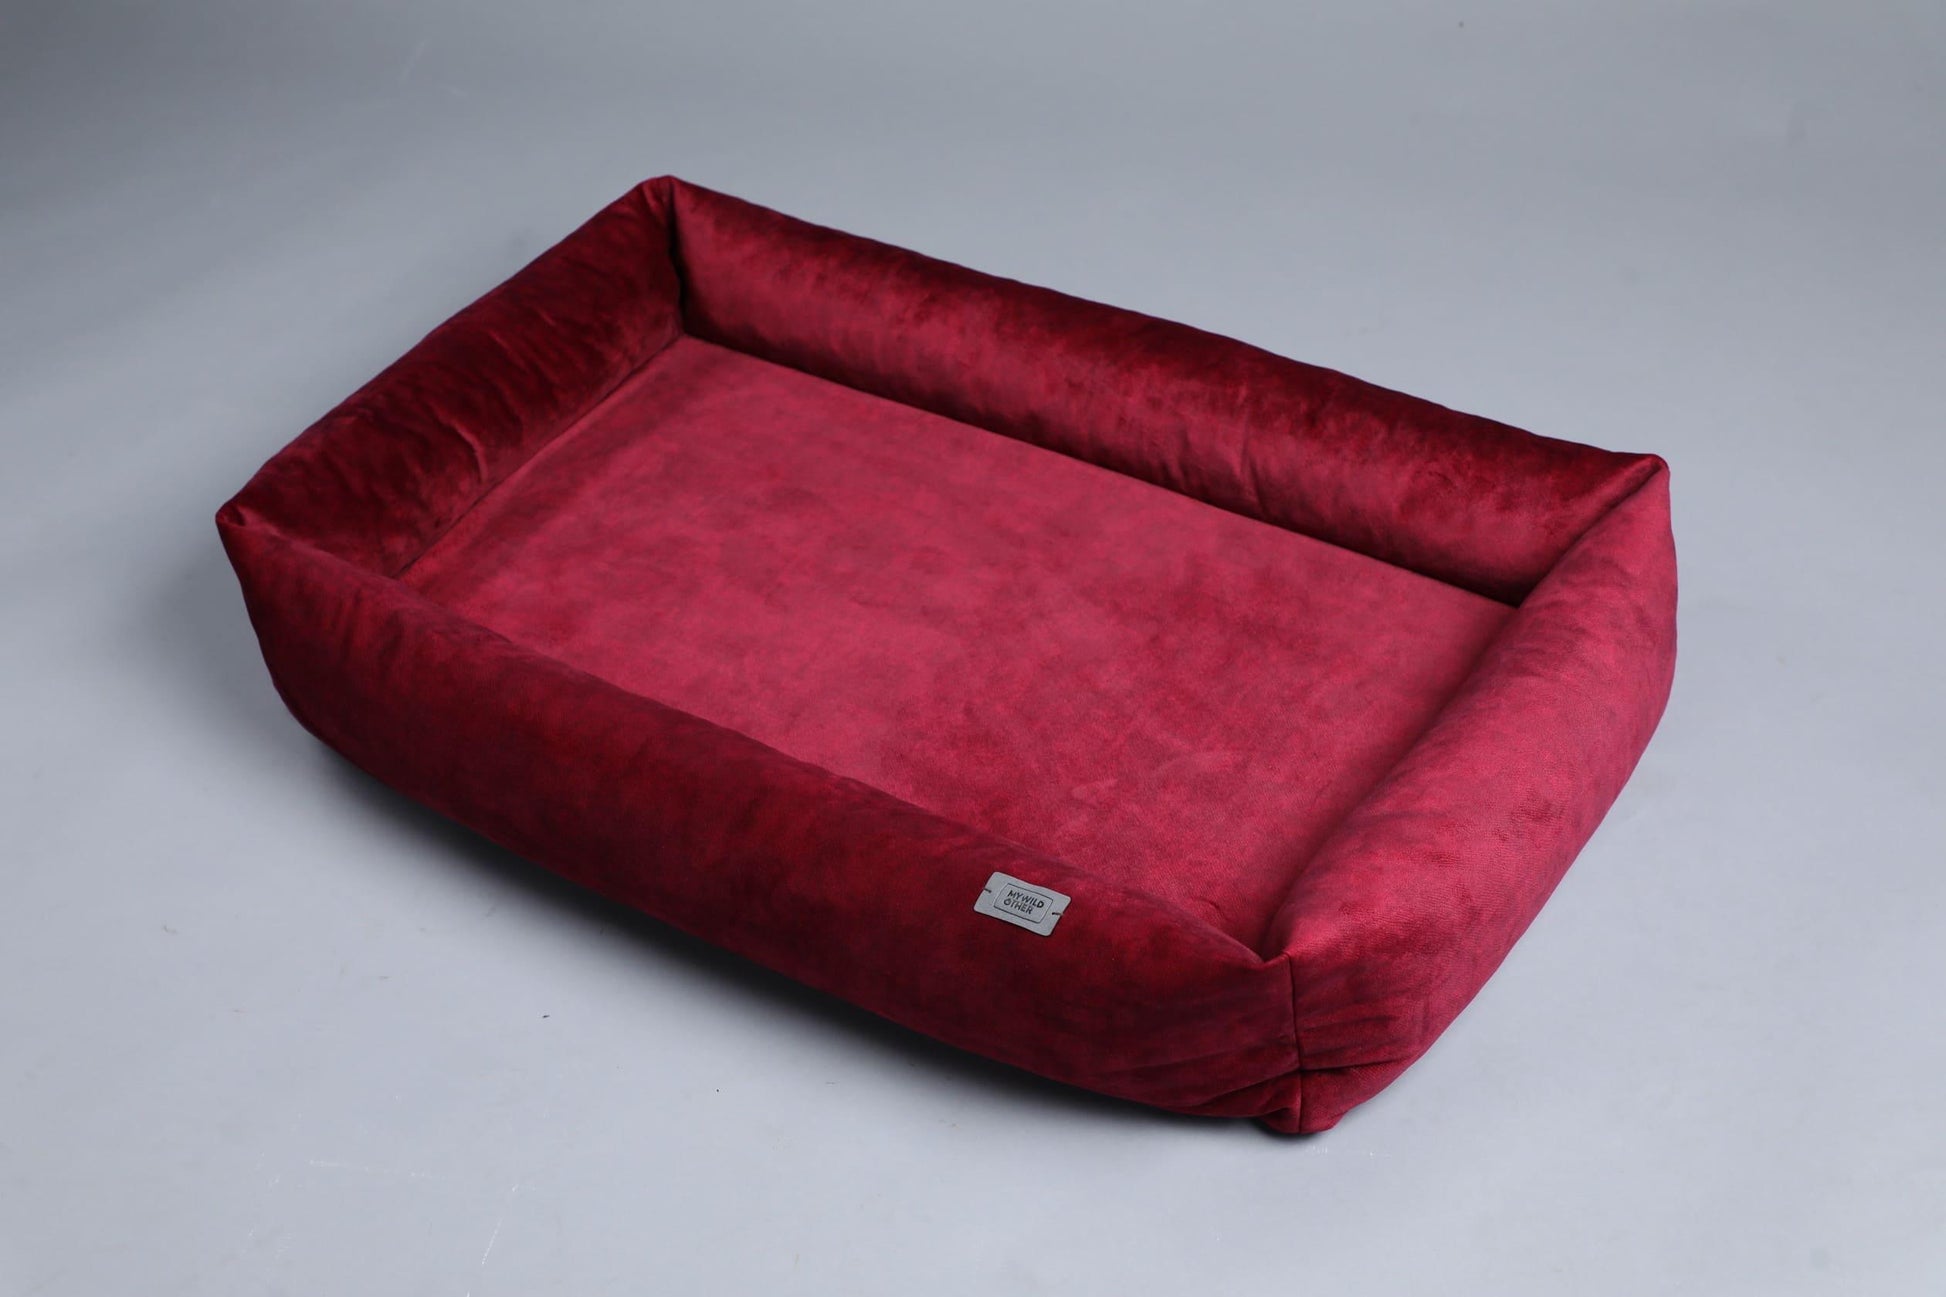 Premium dog bed with sides | 2-sided | RUBY RED - premium dog goods handmade in Europe by My Wild Other